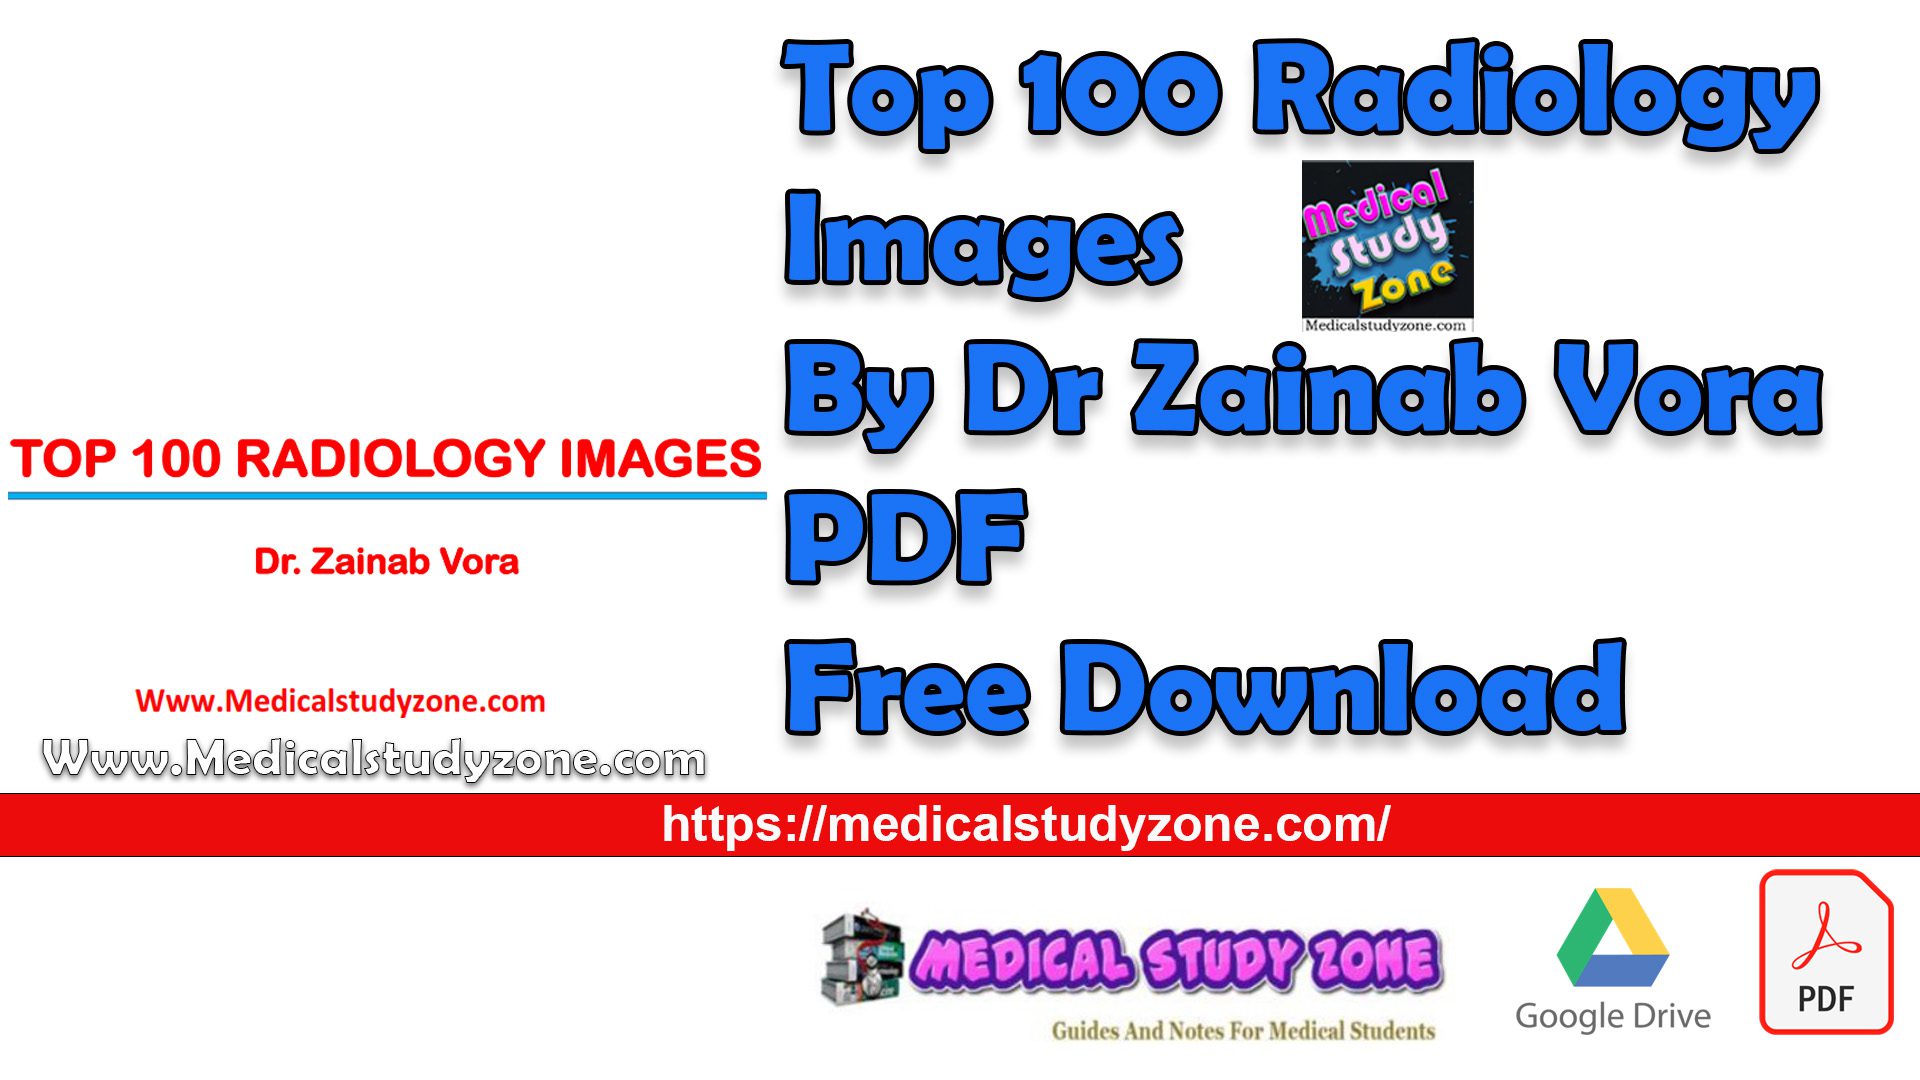 Top 100 Radiology Images By Dr Zainab Vora PDF Free Download